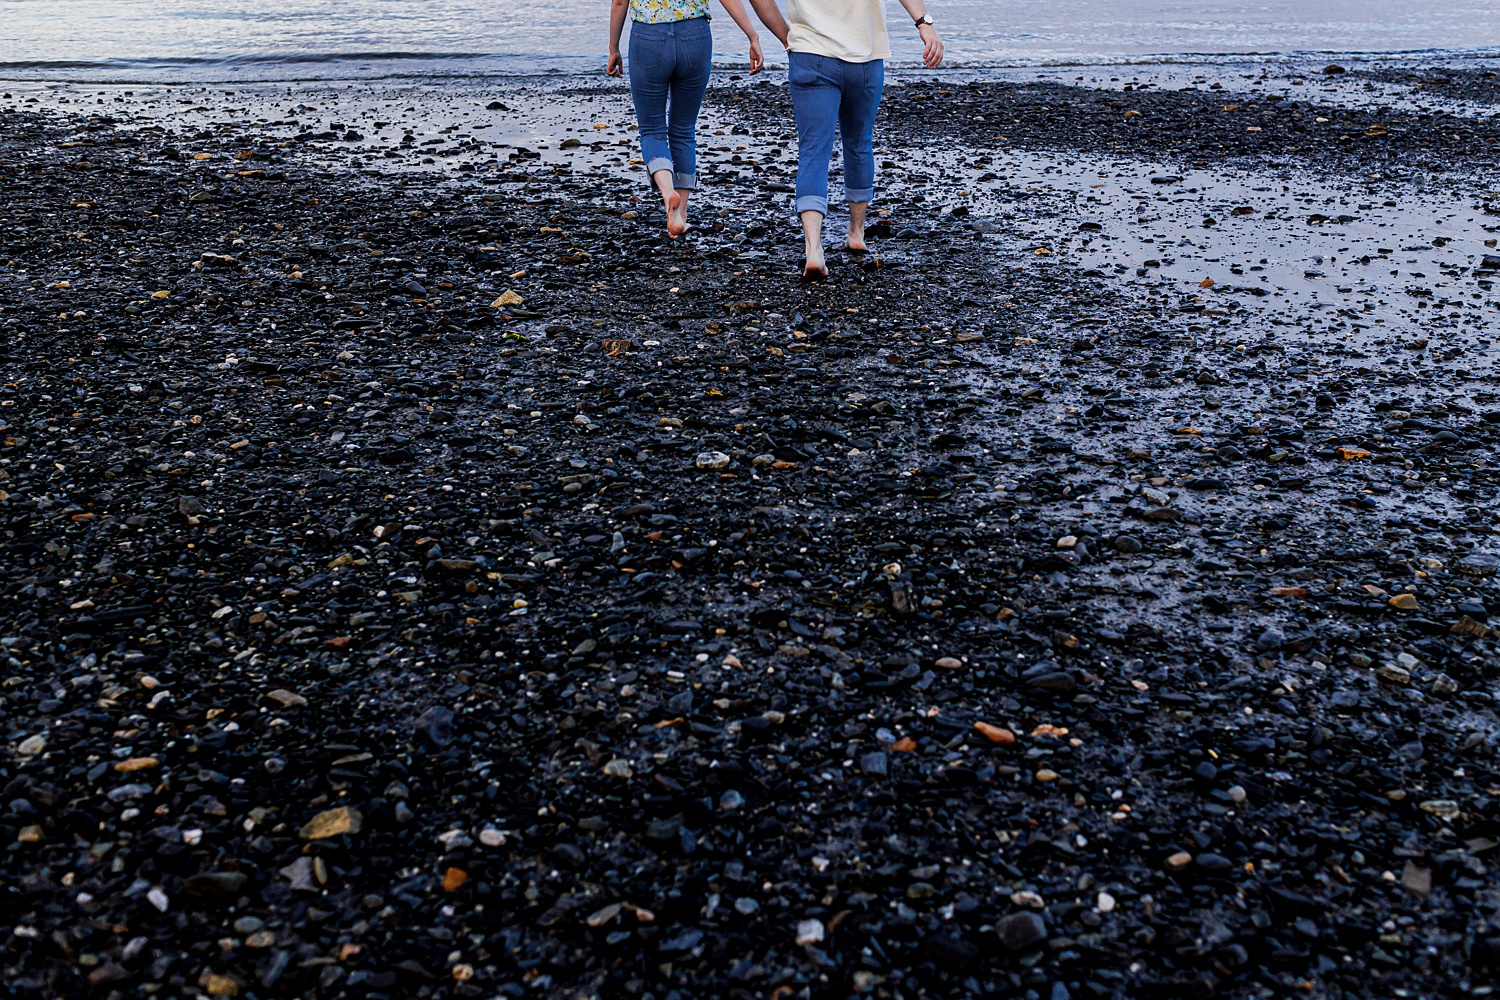 The couple walks on the rocky shores to the ocean water in New Hampshire